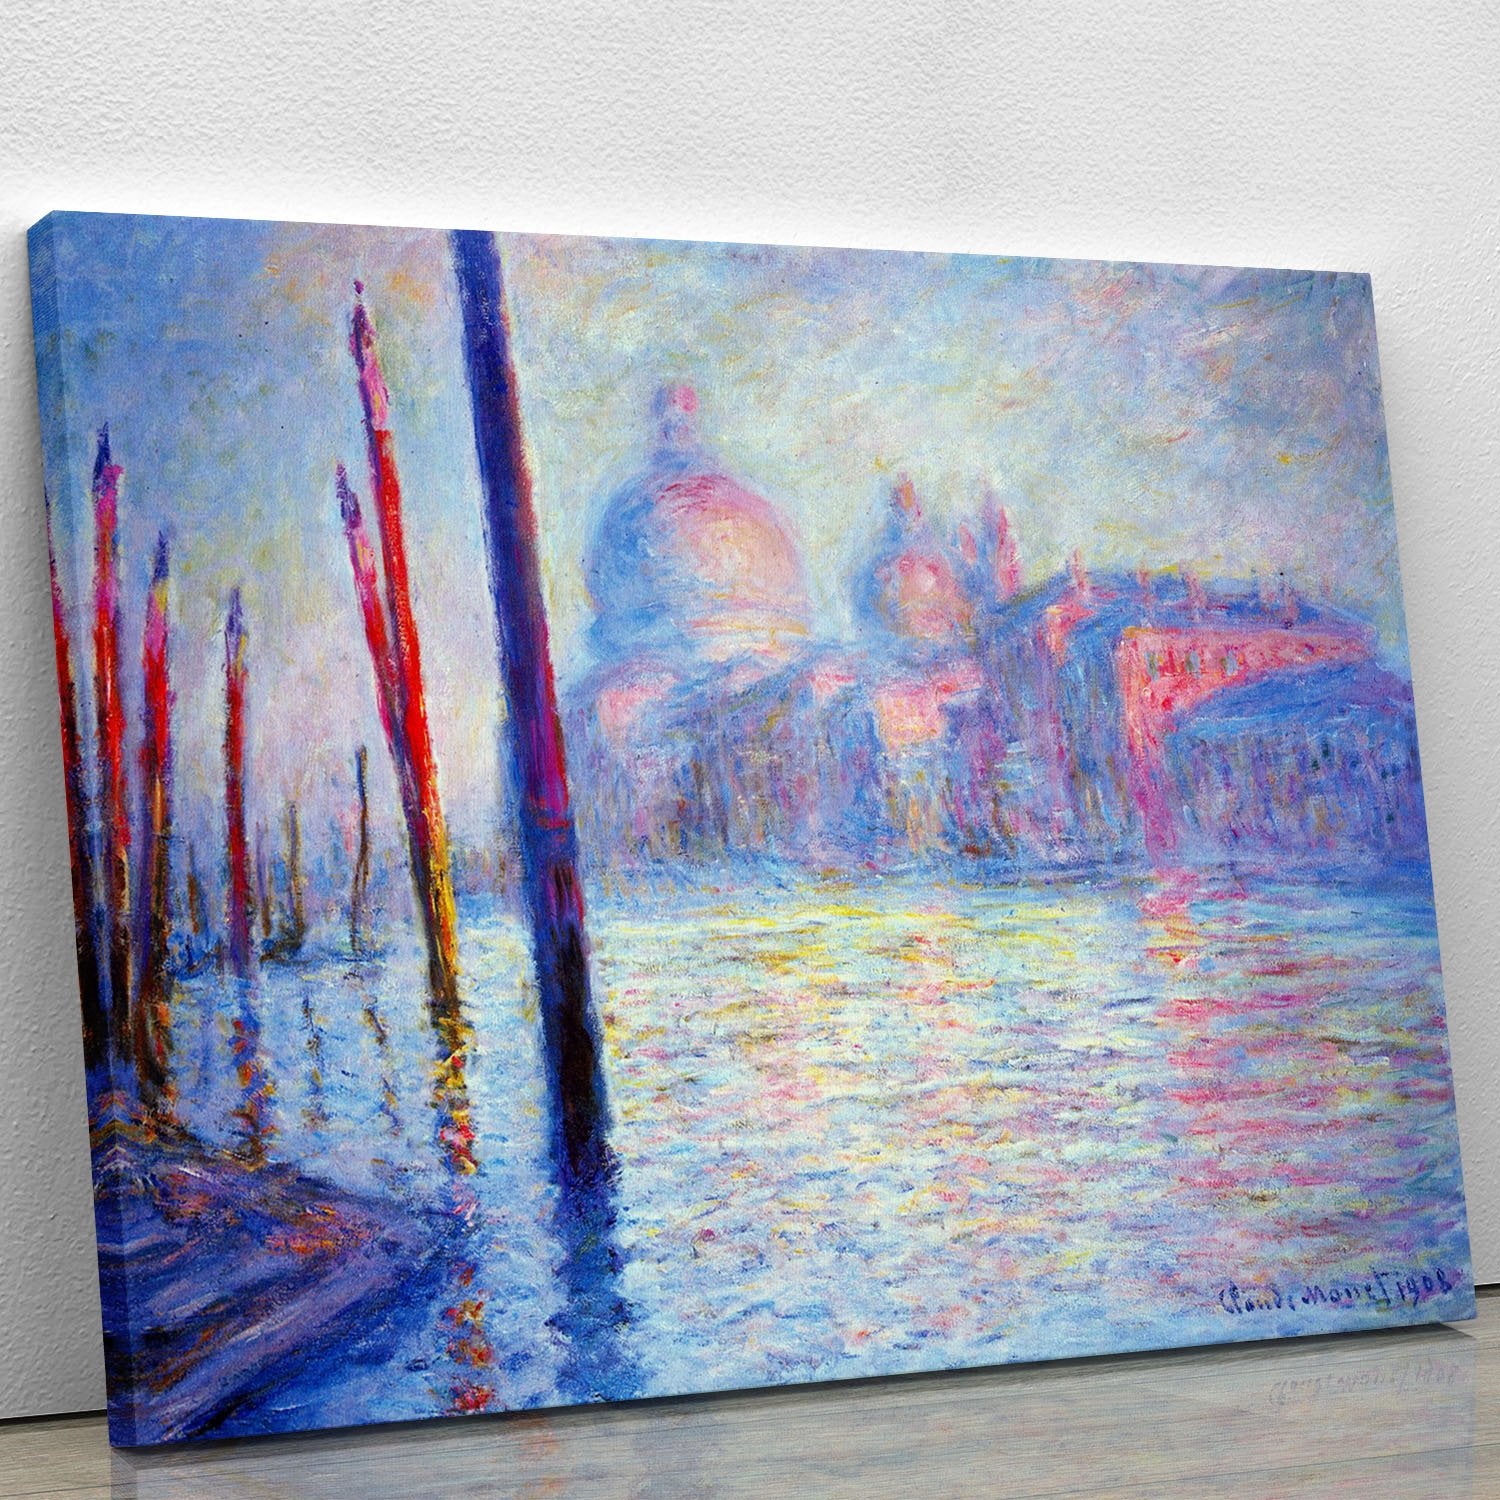 Canal Grand by Monet Canvas Print or Poster